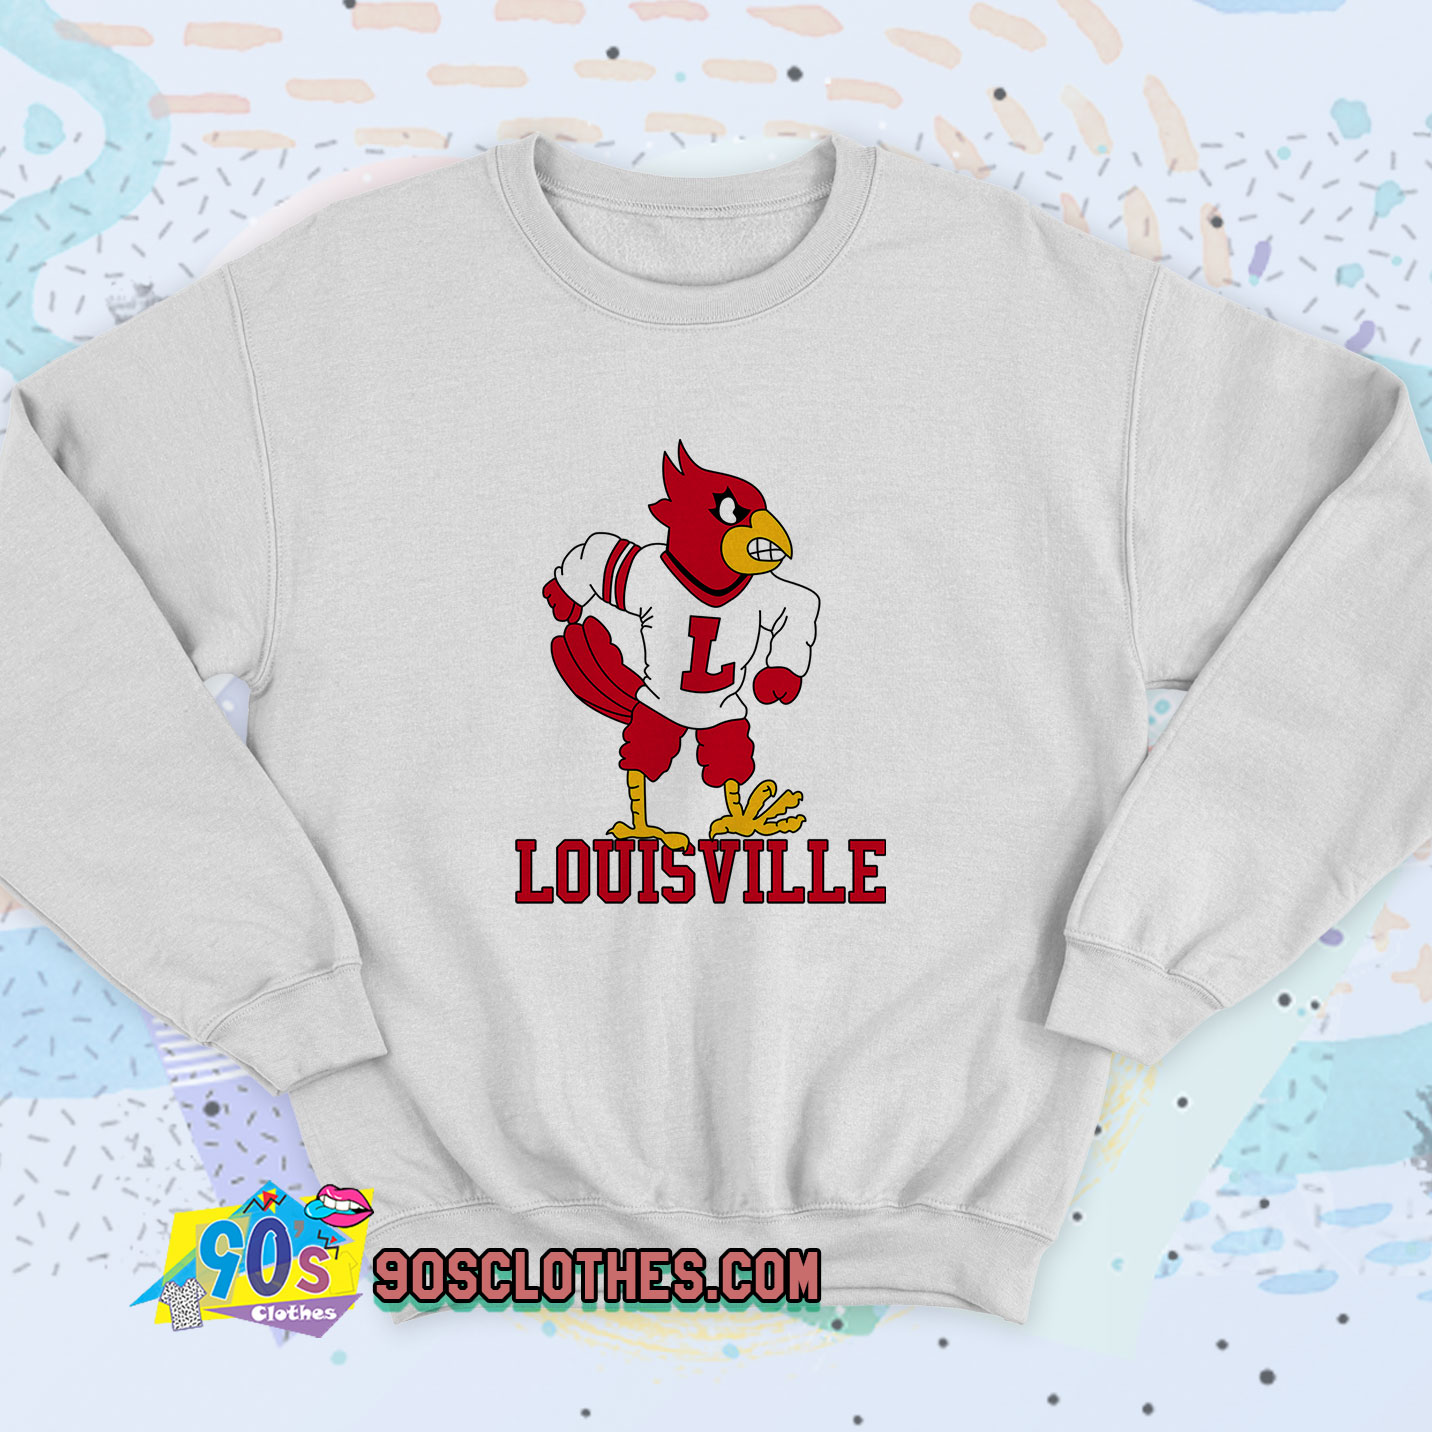 Sports / College Vintage NFL Louisville Cardinals Sweatshirt 1988s Size Large Made in USA